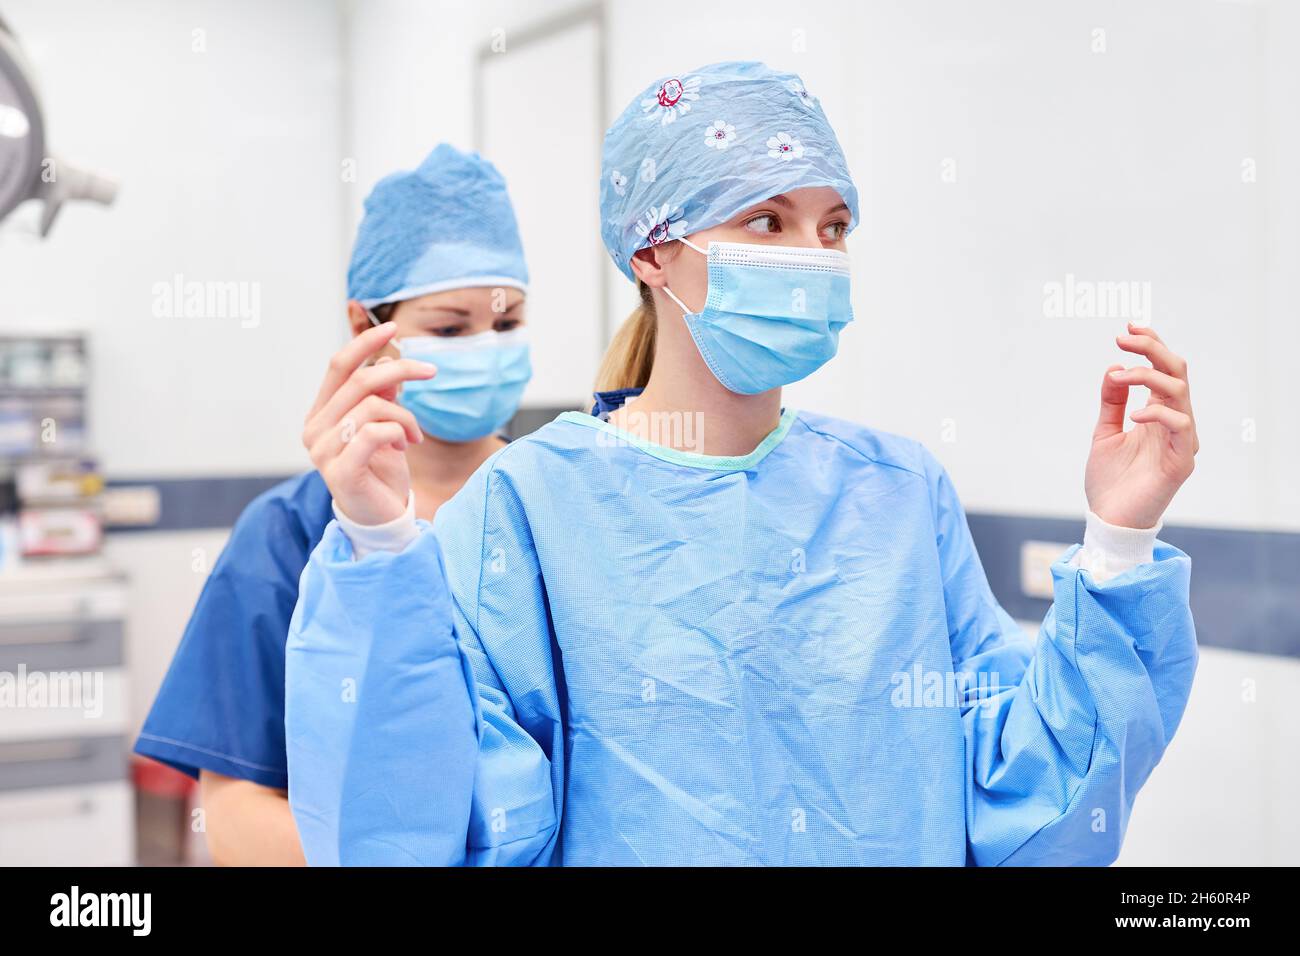 Nurse helps doctor put on gown in surgery before surgery Stock Photo